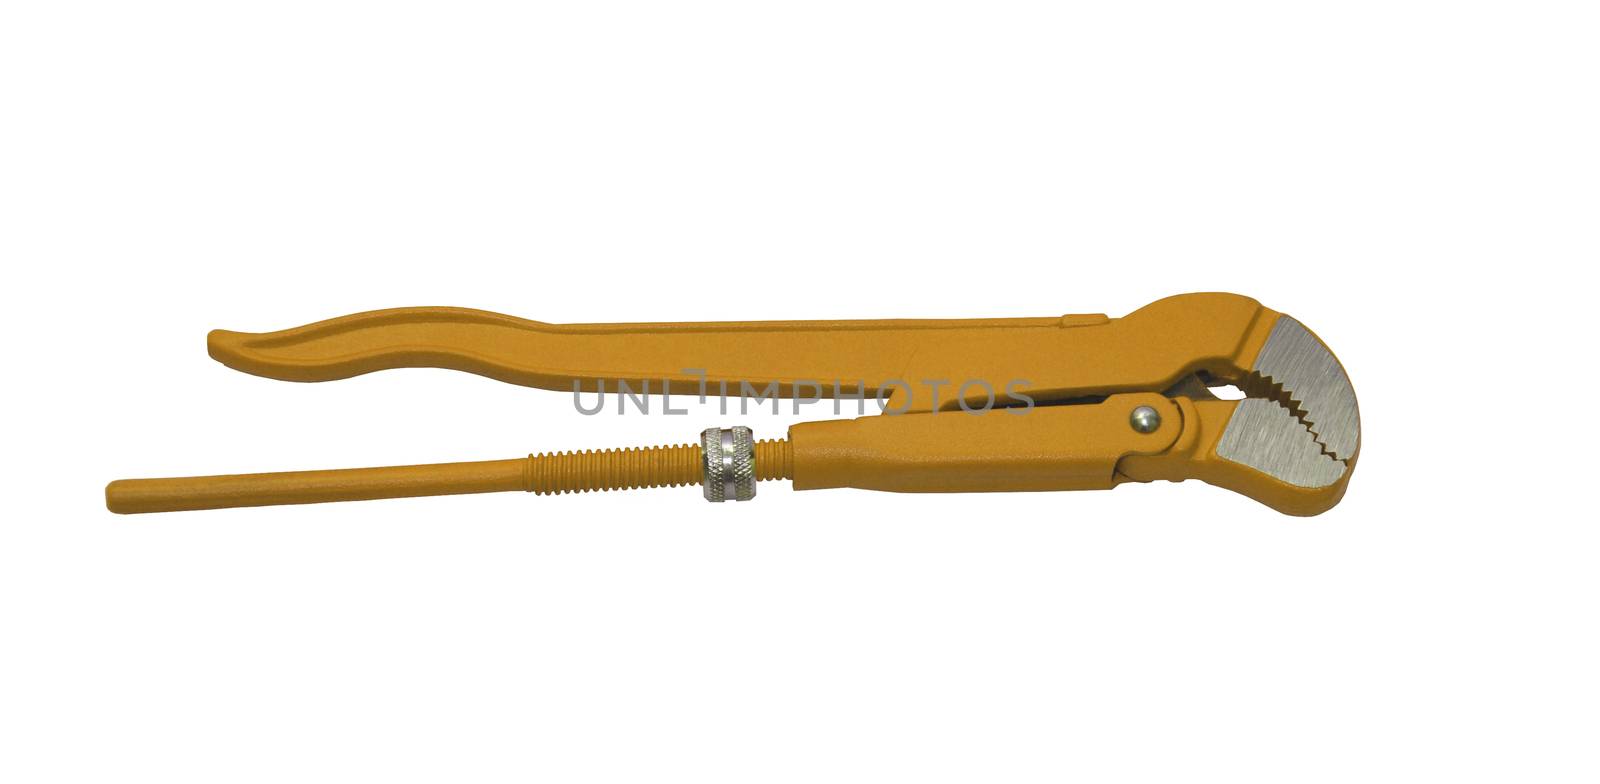 Yellow monkey wrench used for plumbing isolated on a white background by ozaiachin